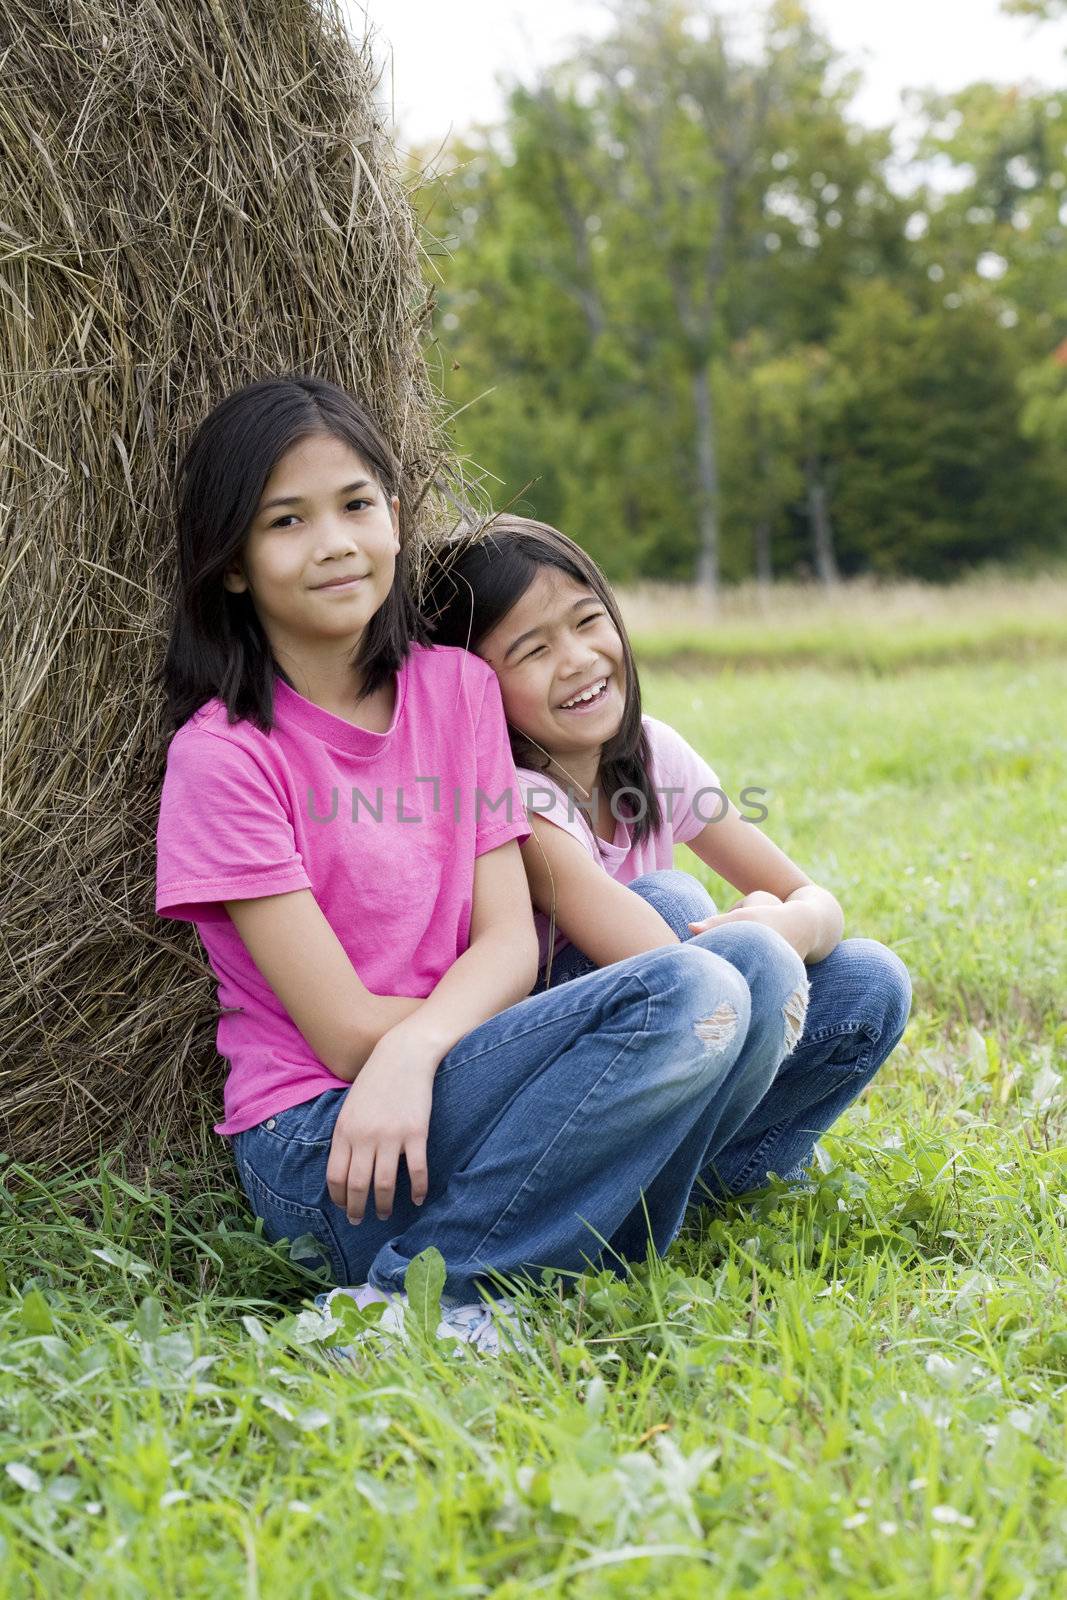 Two young girls sitting against haybale  by jarenwicklund